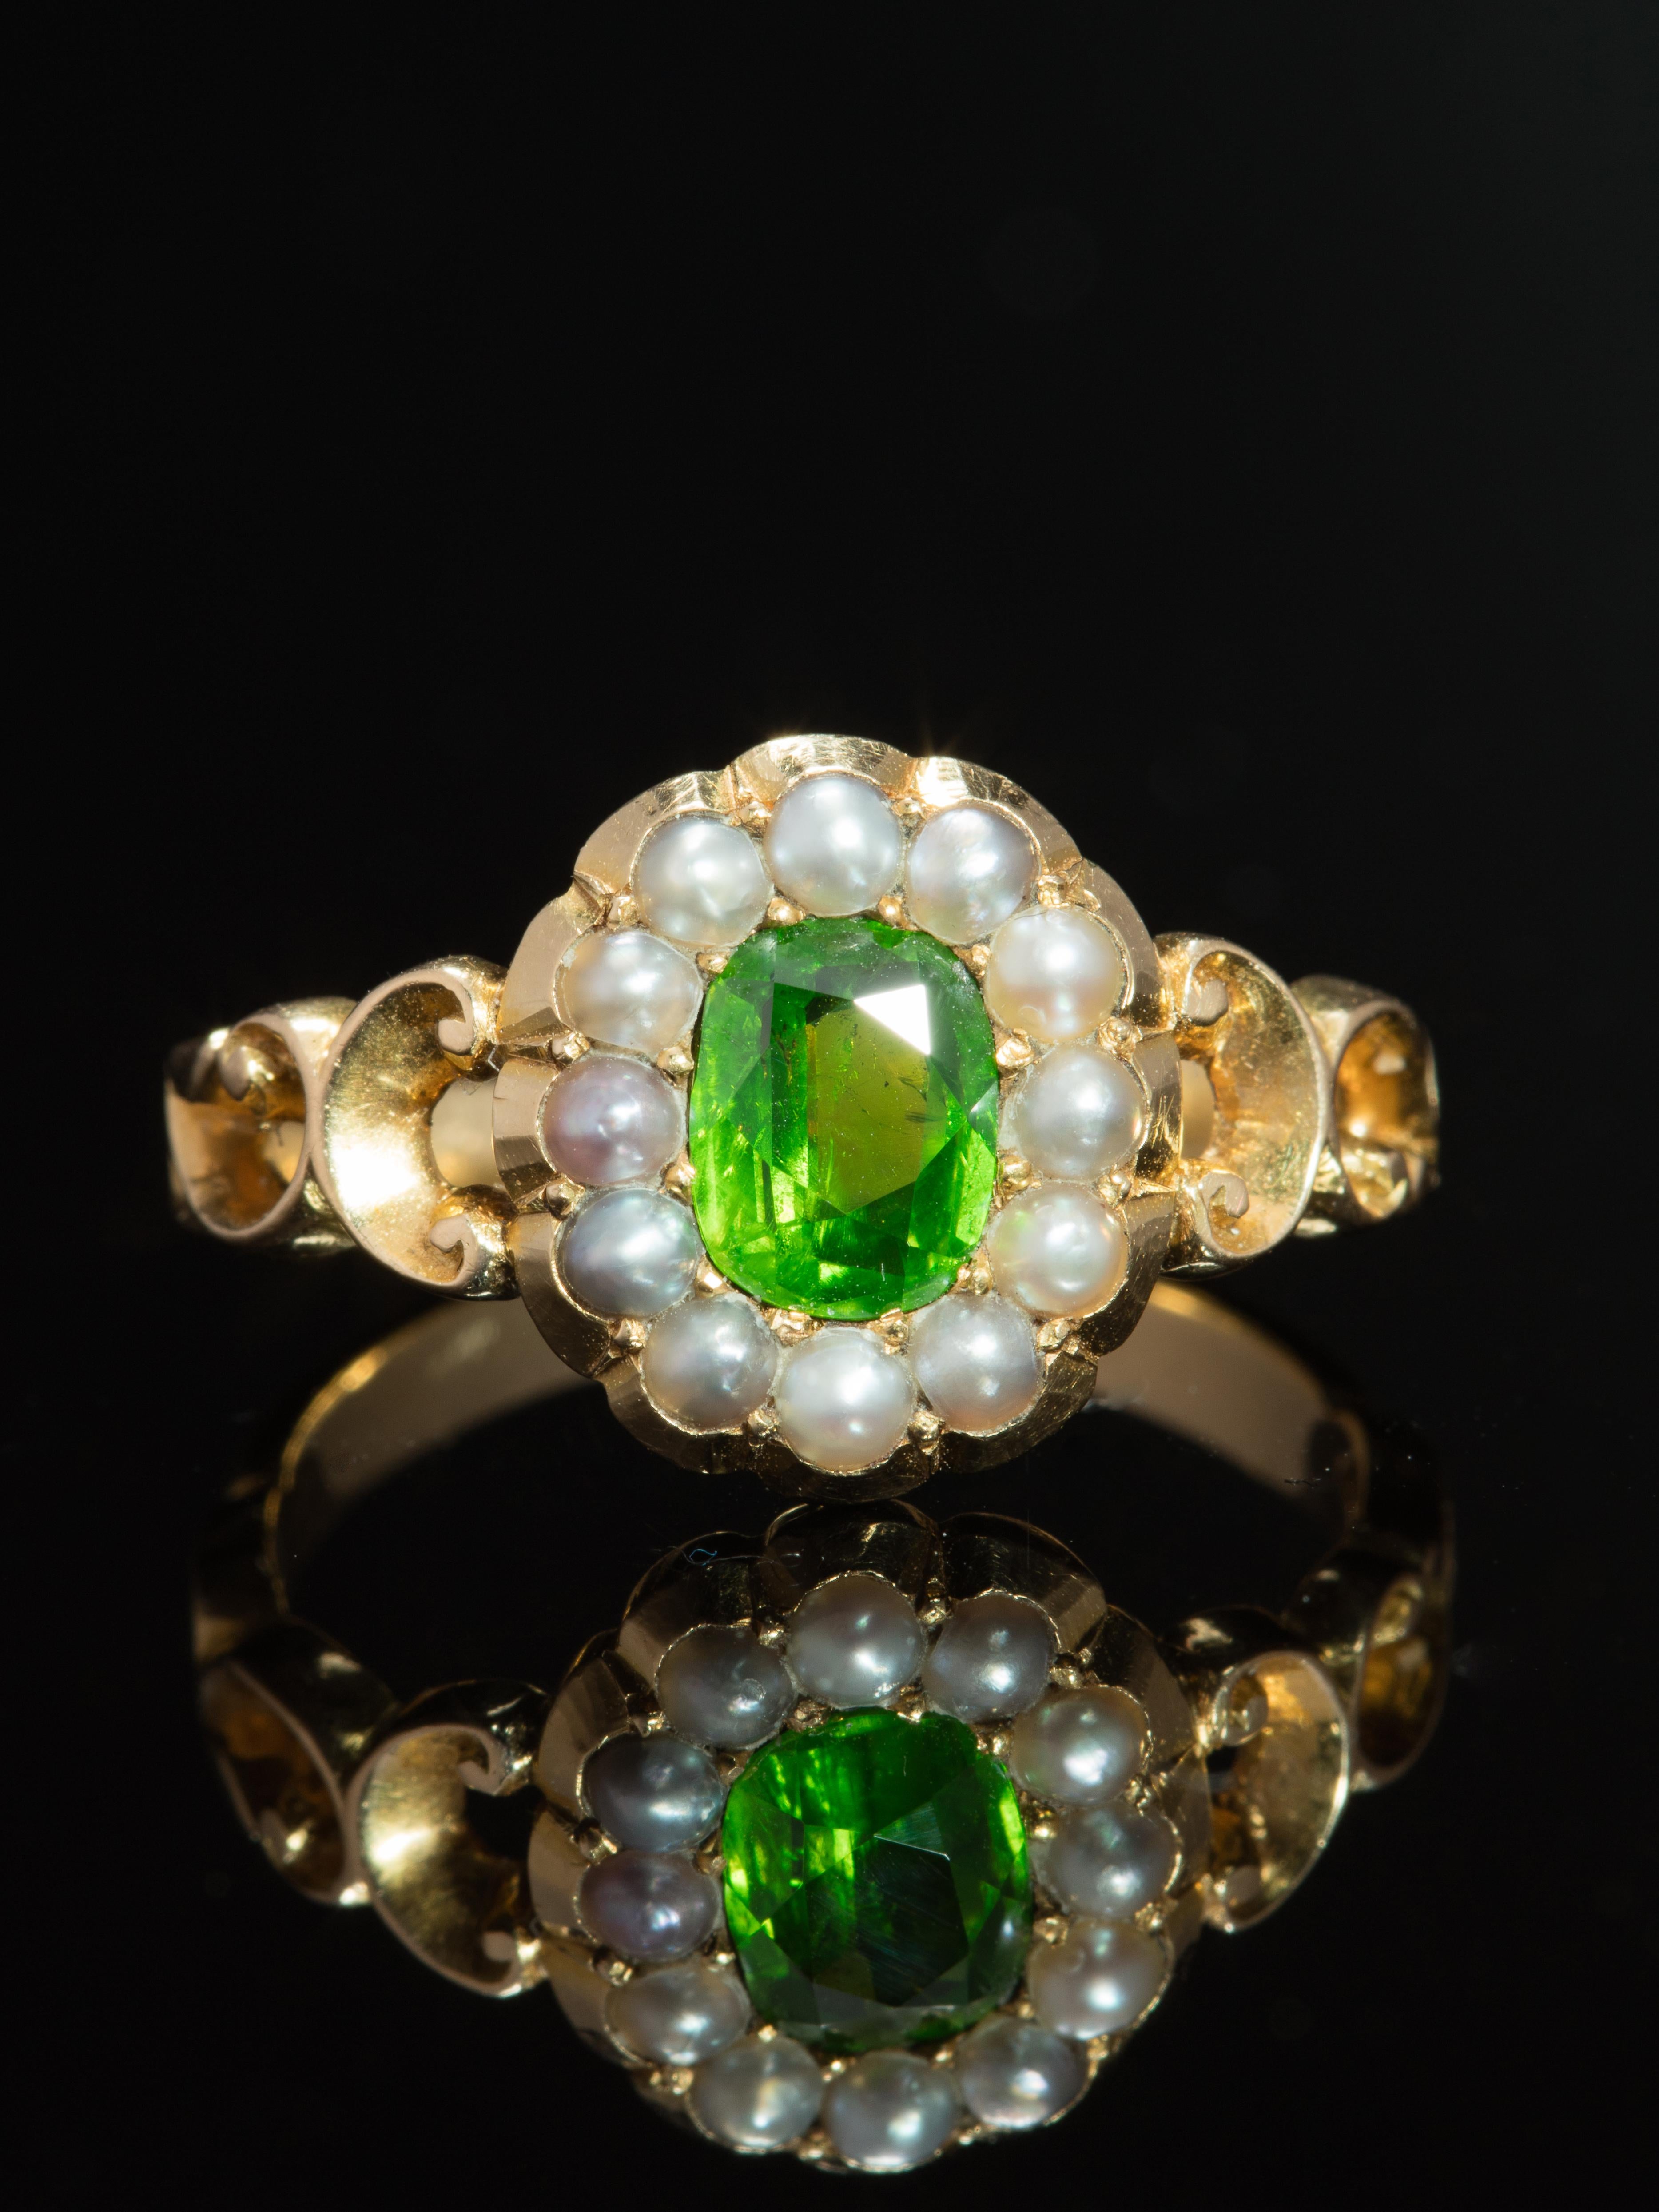 Full of romanticism and symbolism is this dramatic flower ring featuring a vibrant and richly saturated green demantoid garnet complemented by lustrous delicate pearls in a classic cluster design. 

Extremely popular during the late 1800s and early